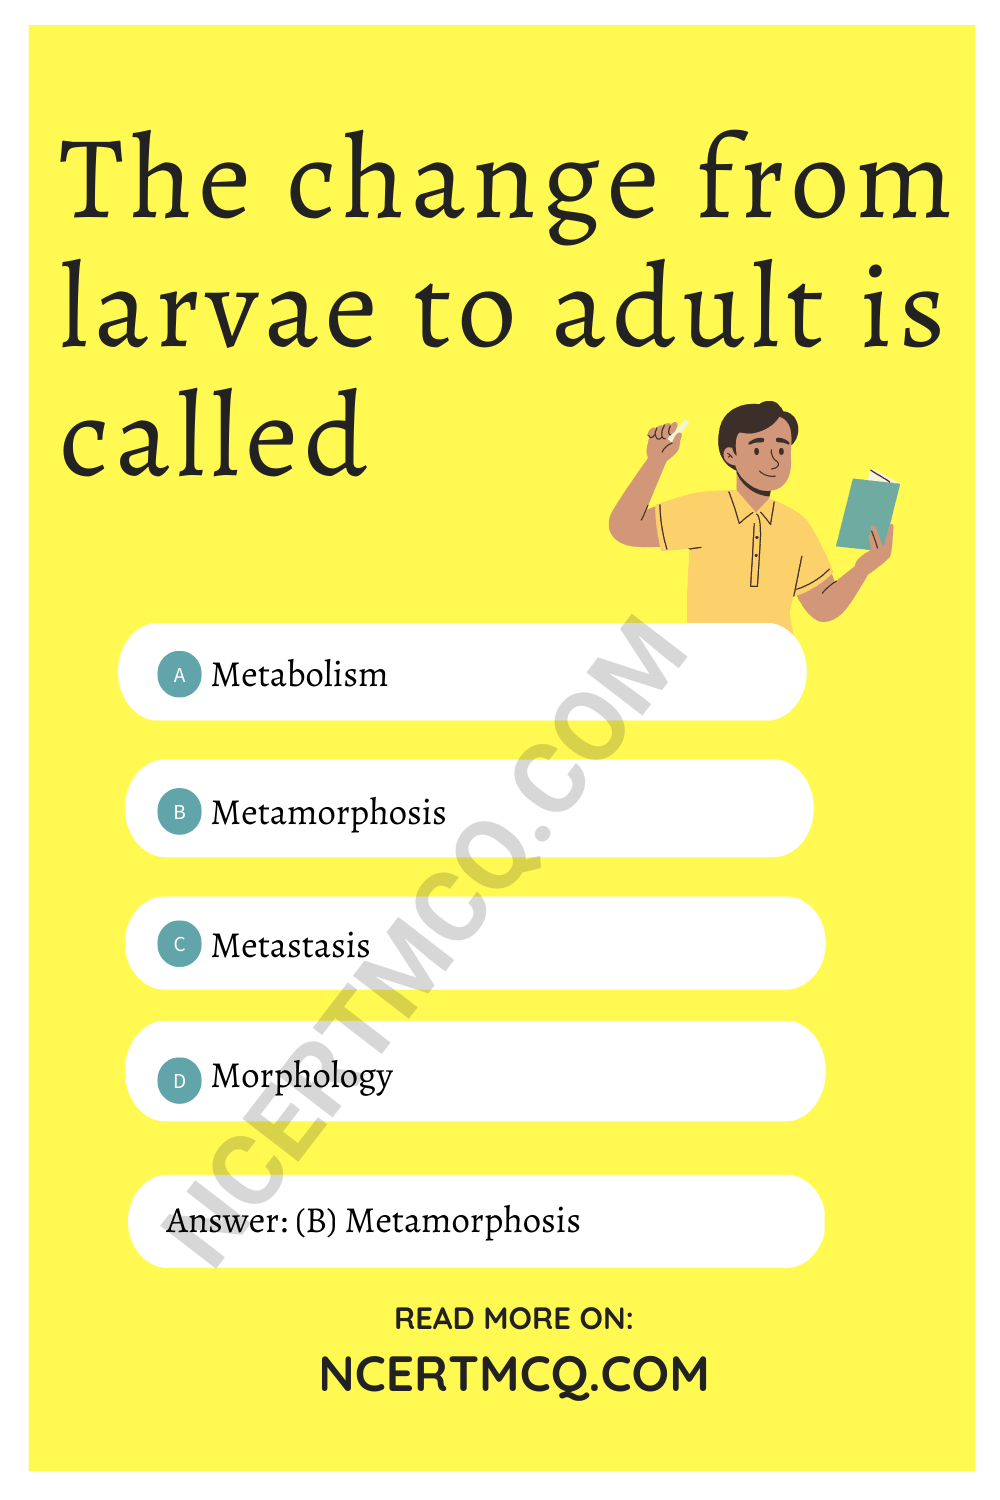 The change from larvae to adult is called